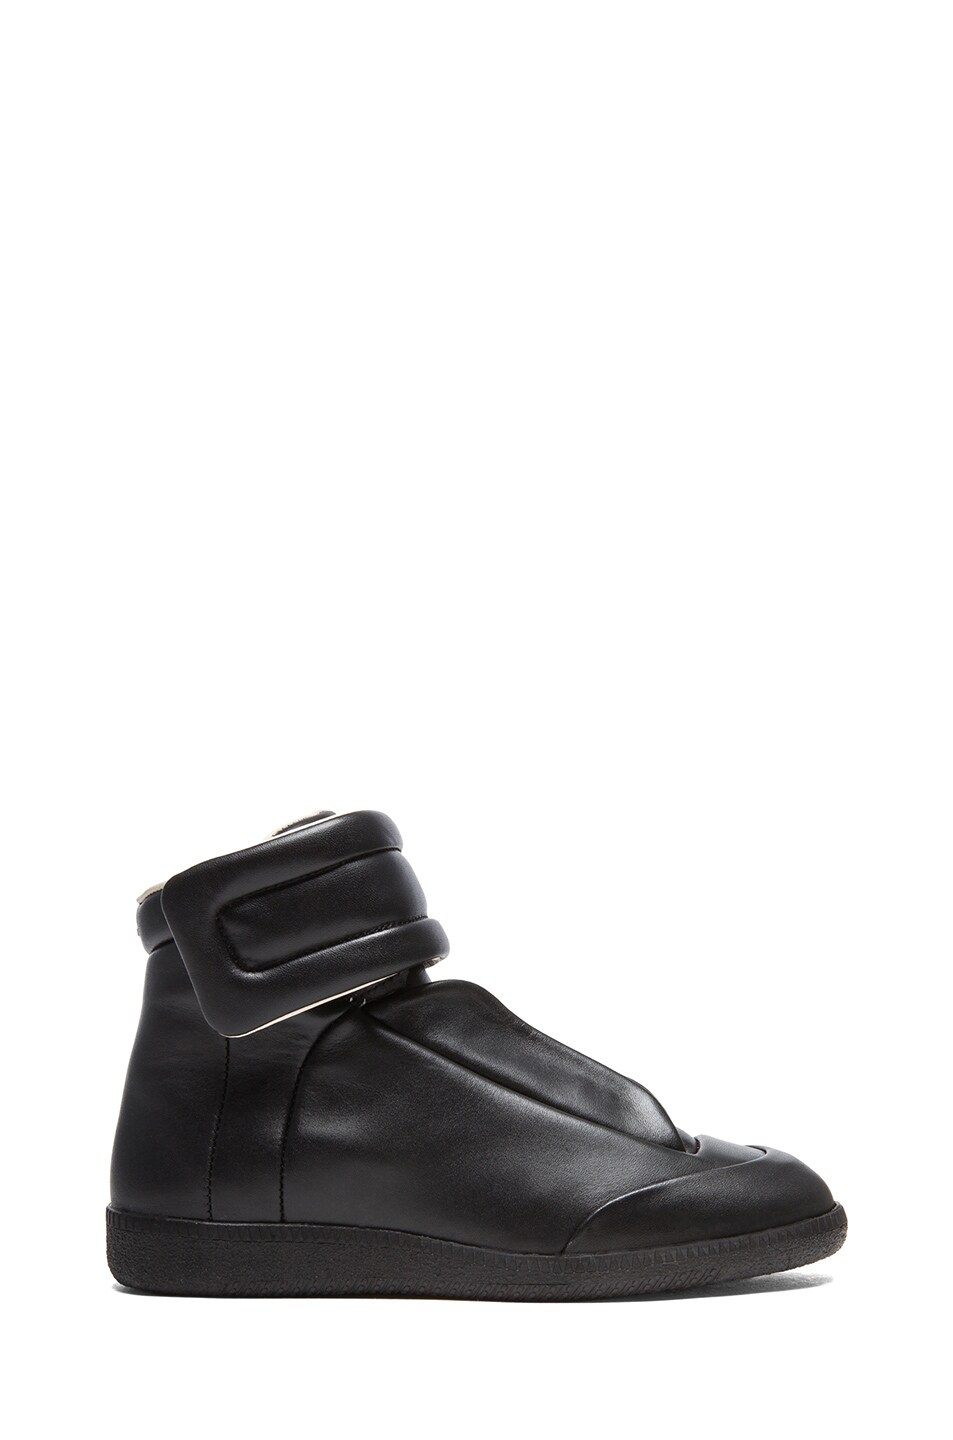 Image 1 of Maison Margiela Future Leather High Tops in Black